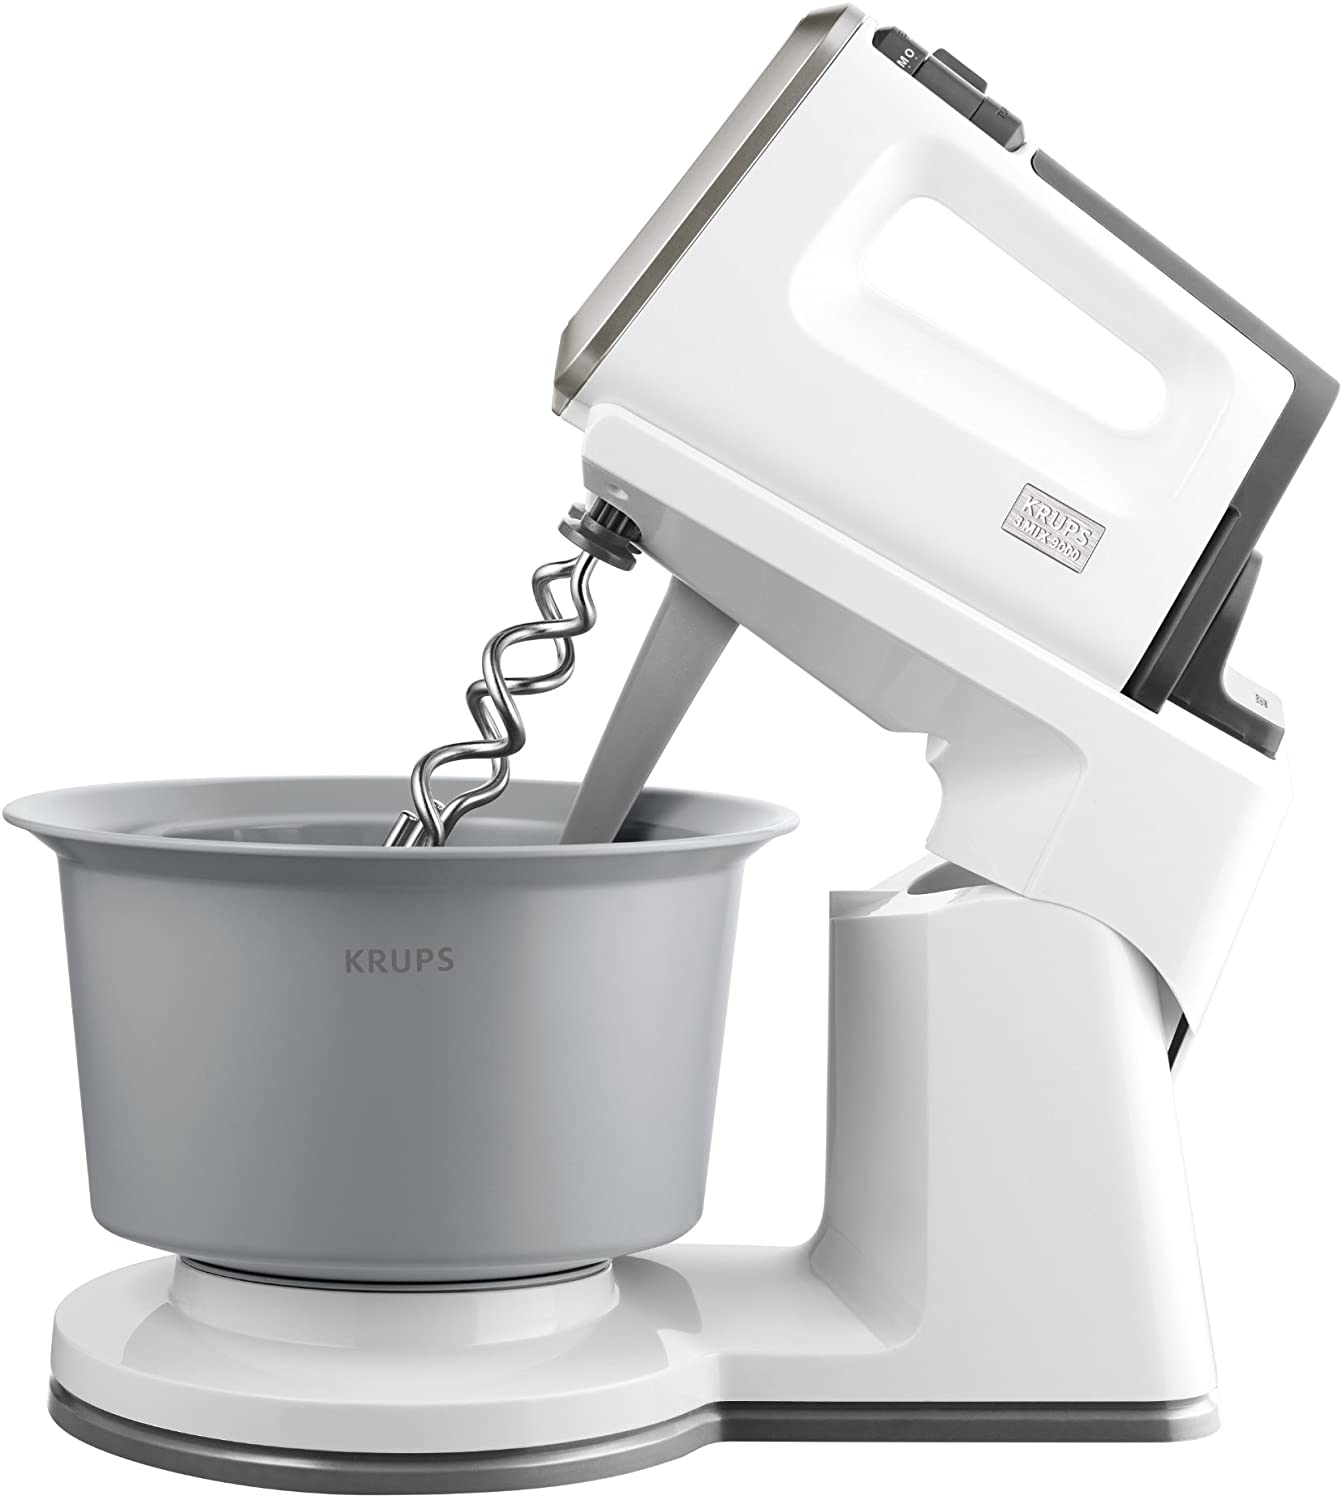 Krups GN 9061 Hand Mixer 3 Mix 9000 Combi (500 Watt, with Turbo Level) Mixing Stand White / Grey